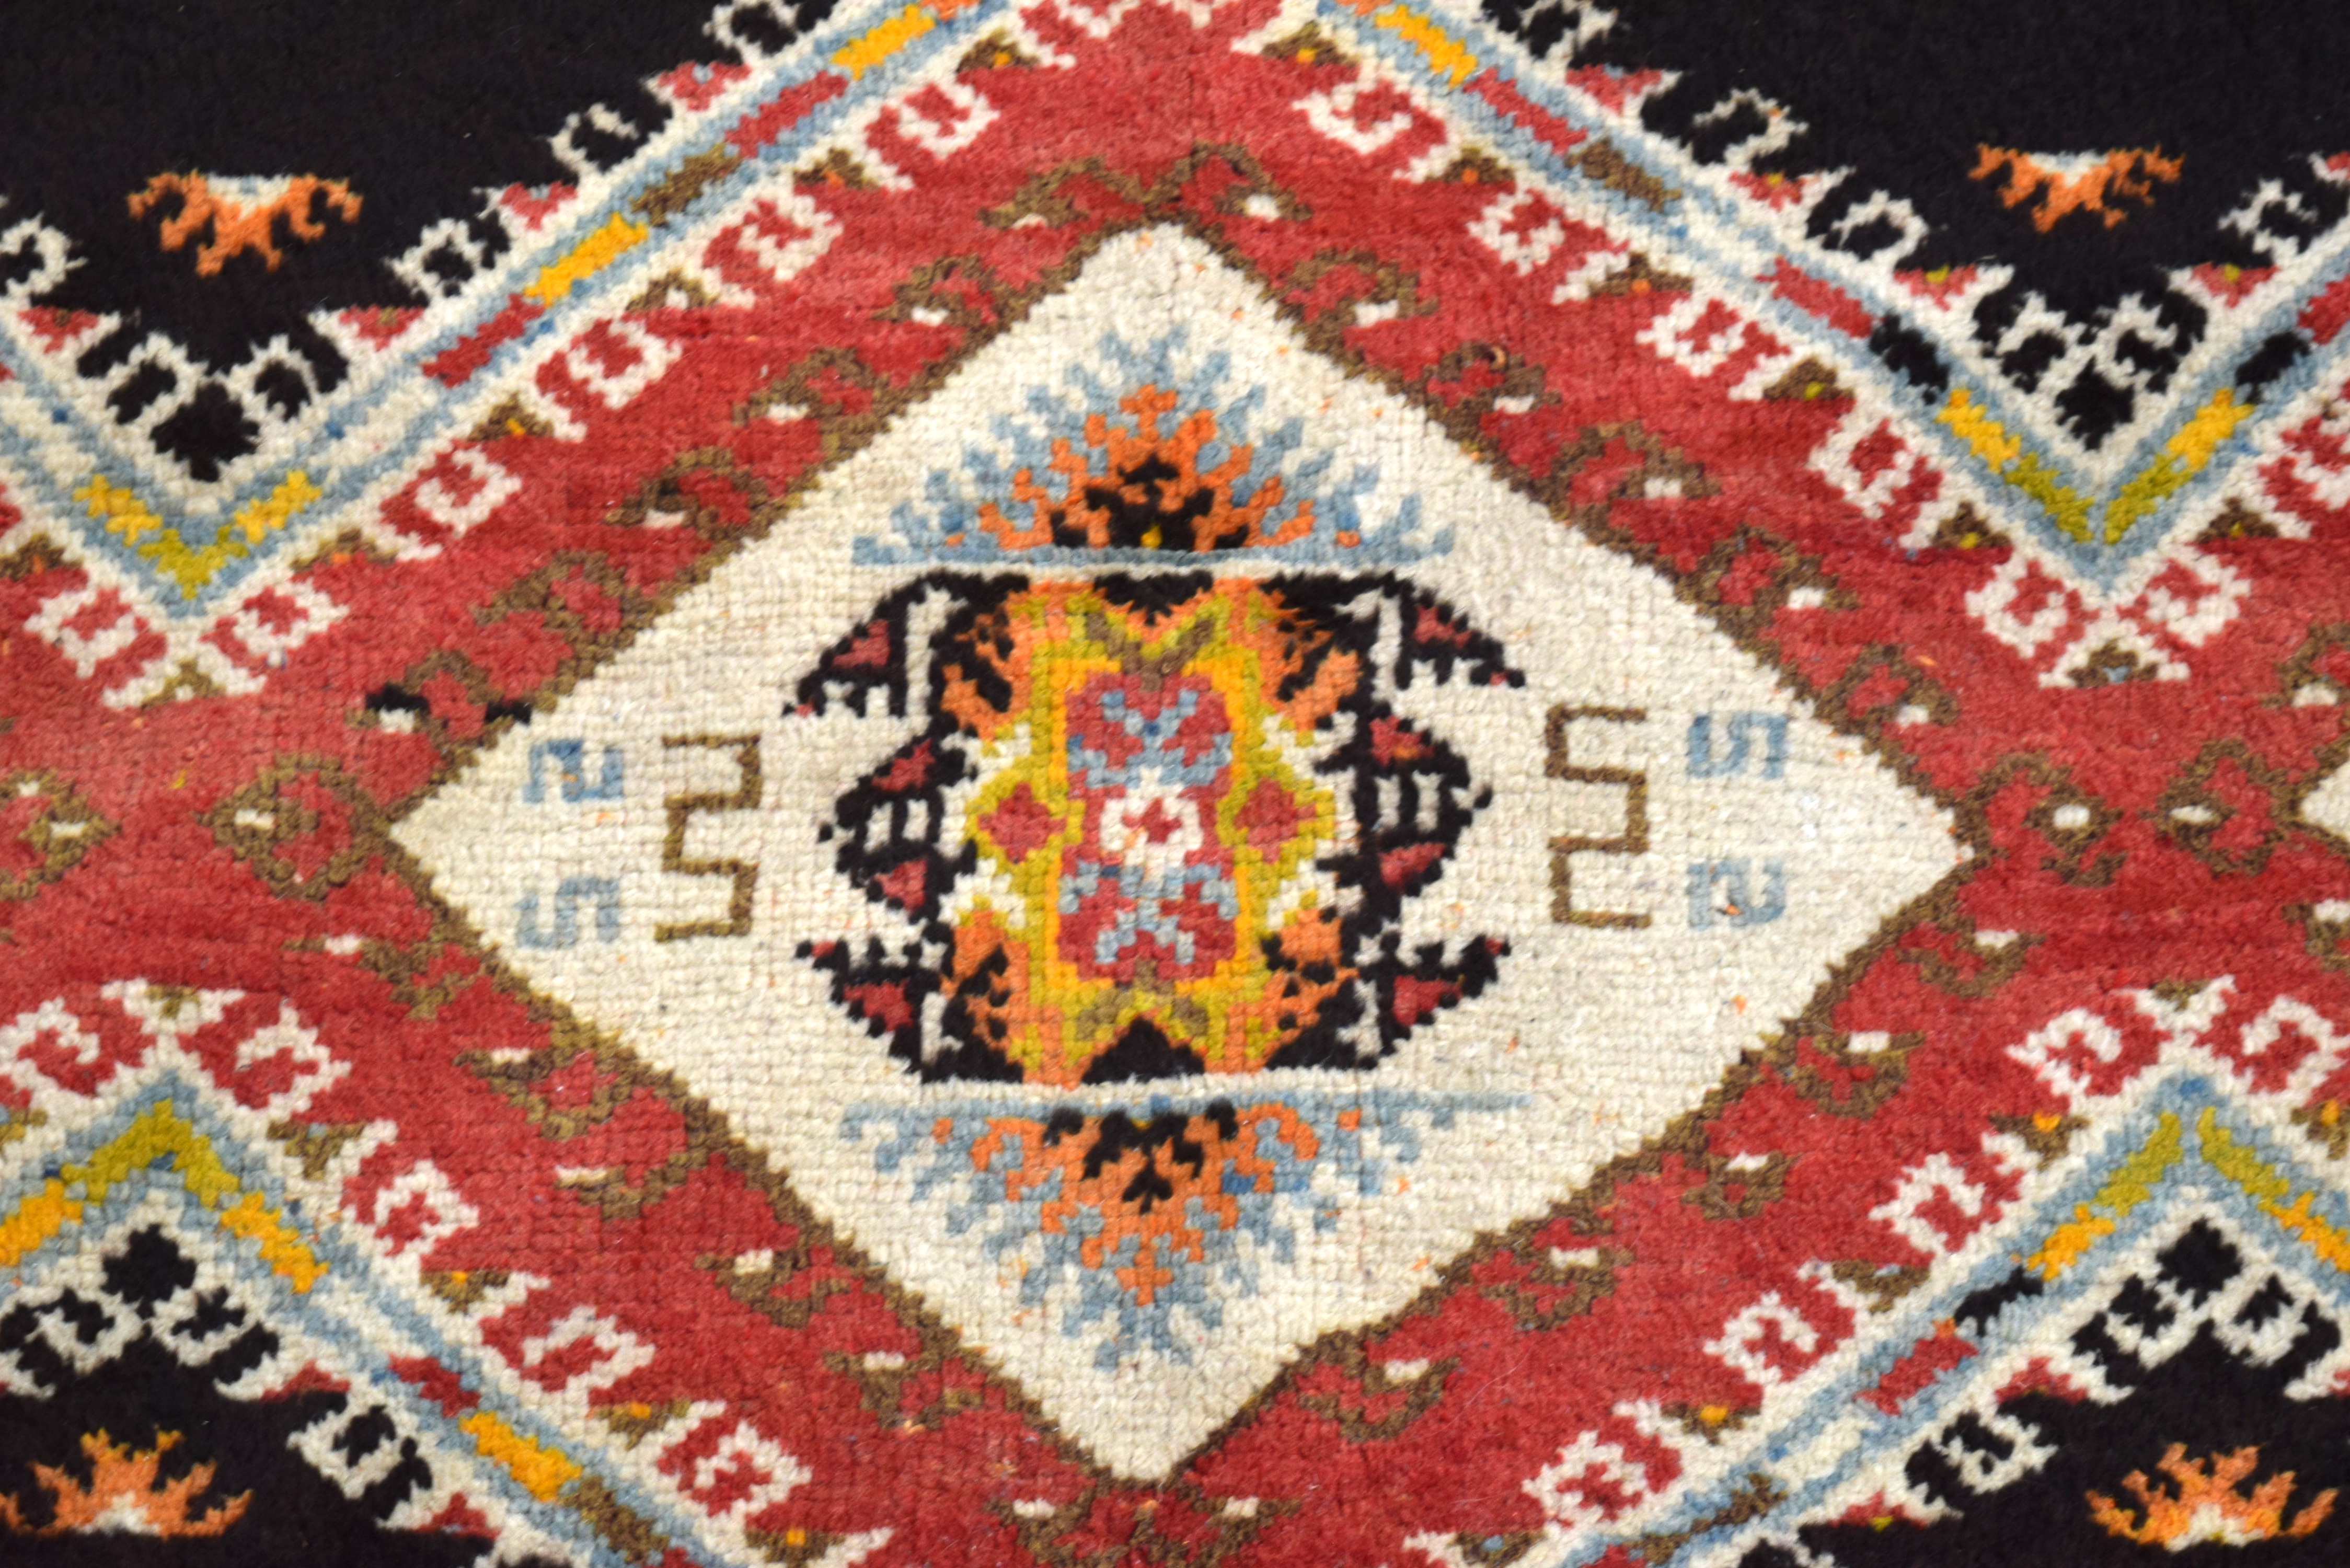 AN EARLY MID 20TH CENTURY BERGAMA RUG. 146 cm x 114 cm. - Image 2 of 4